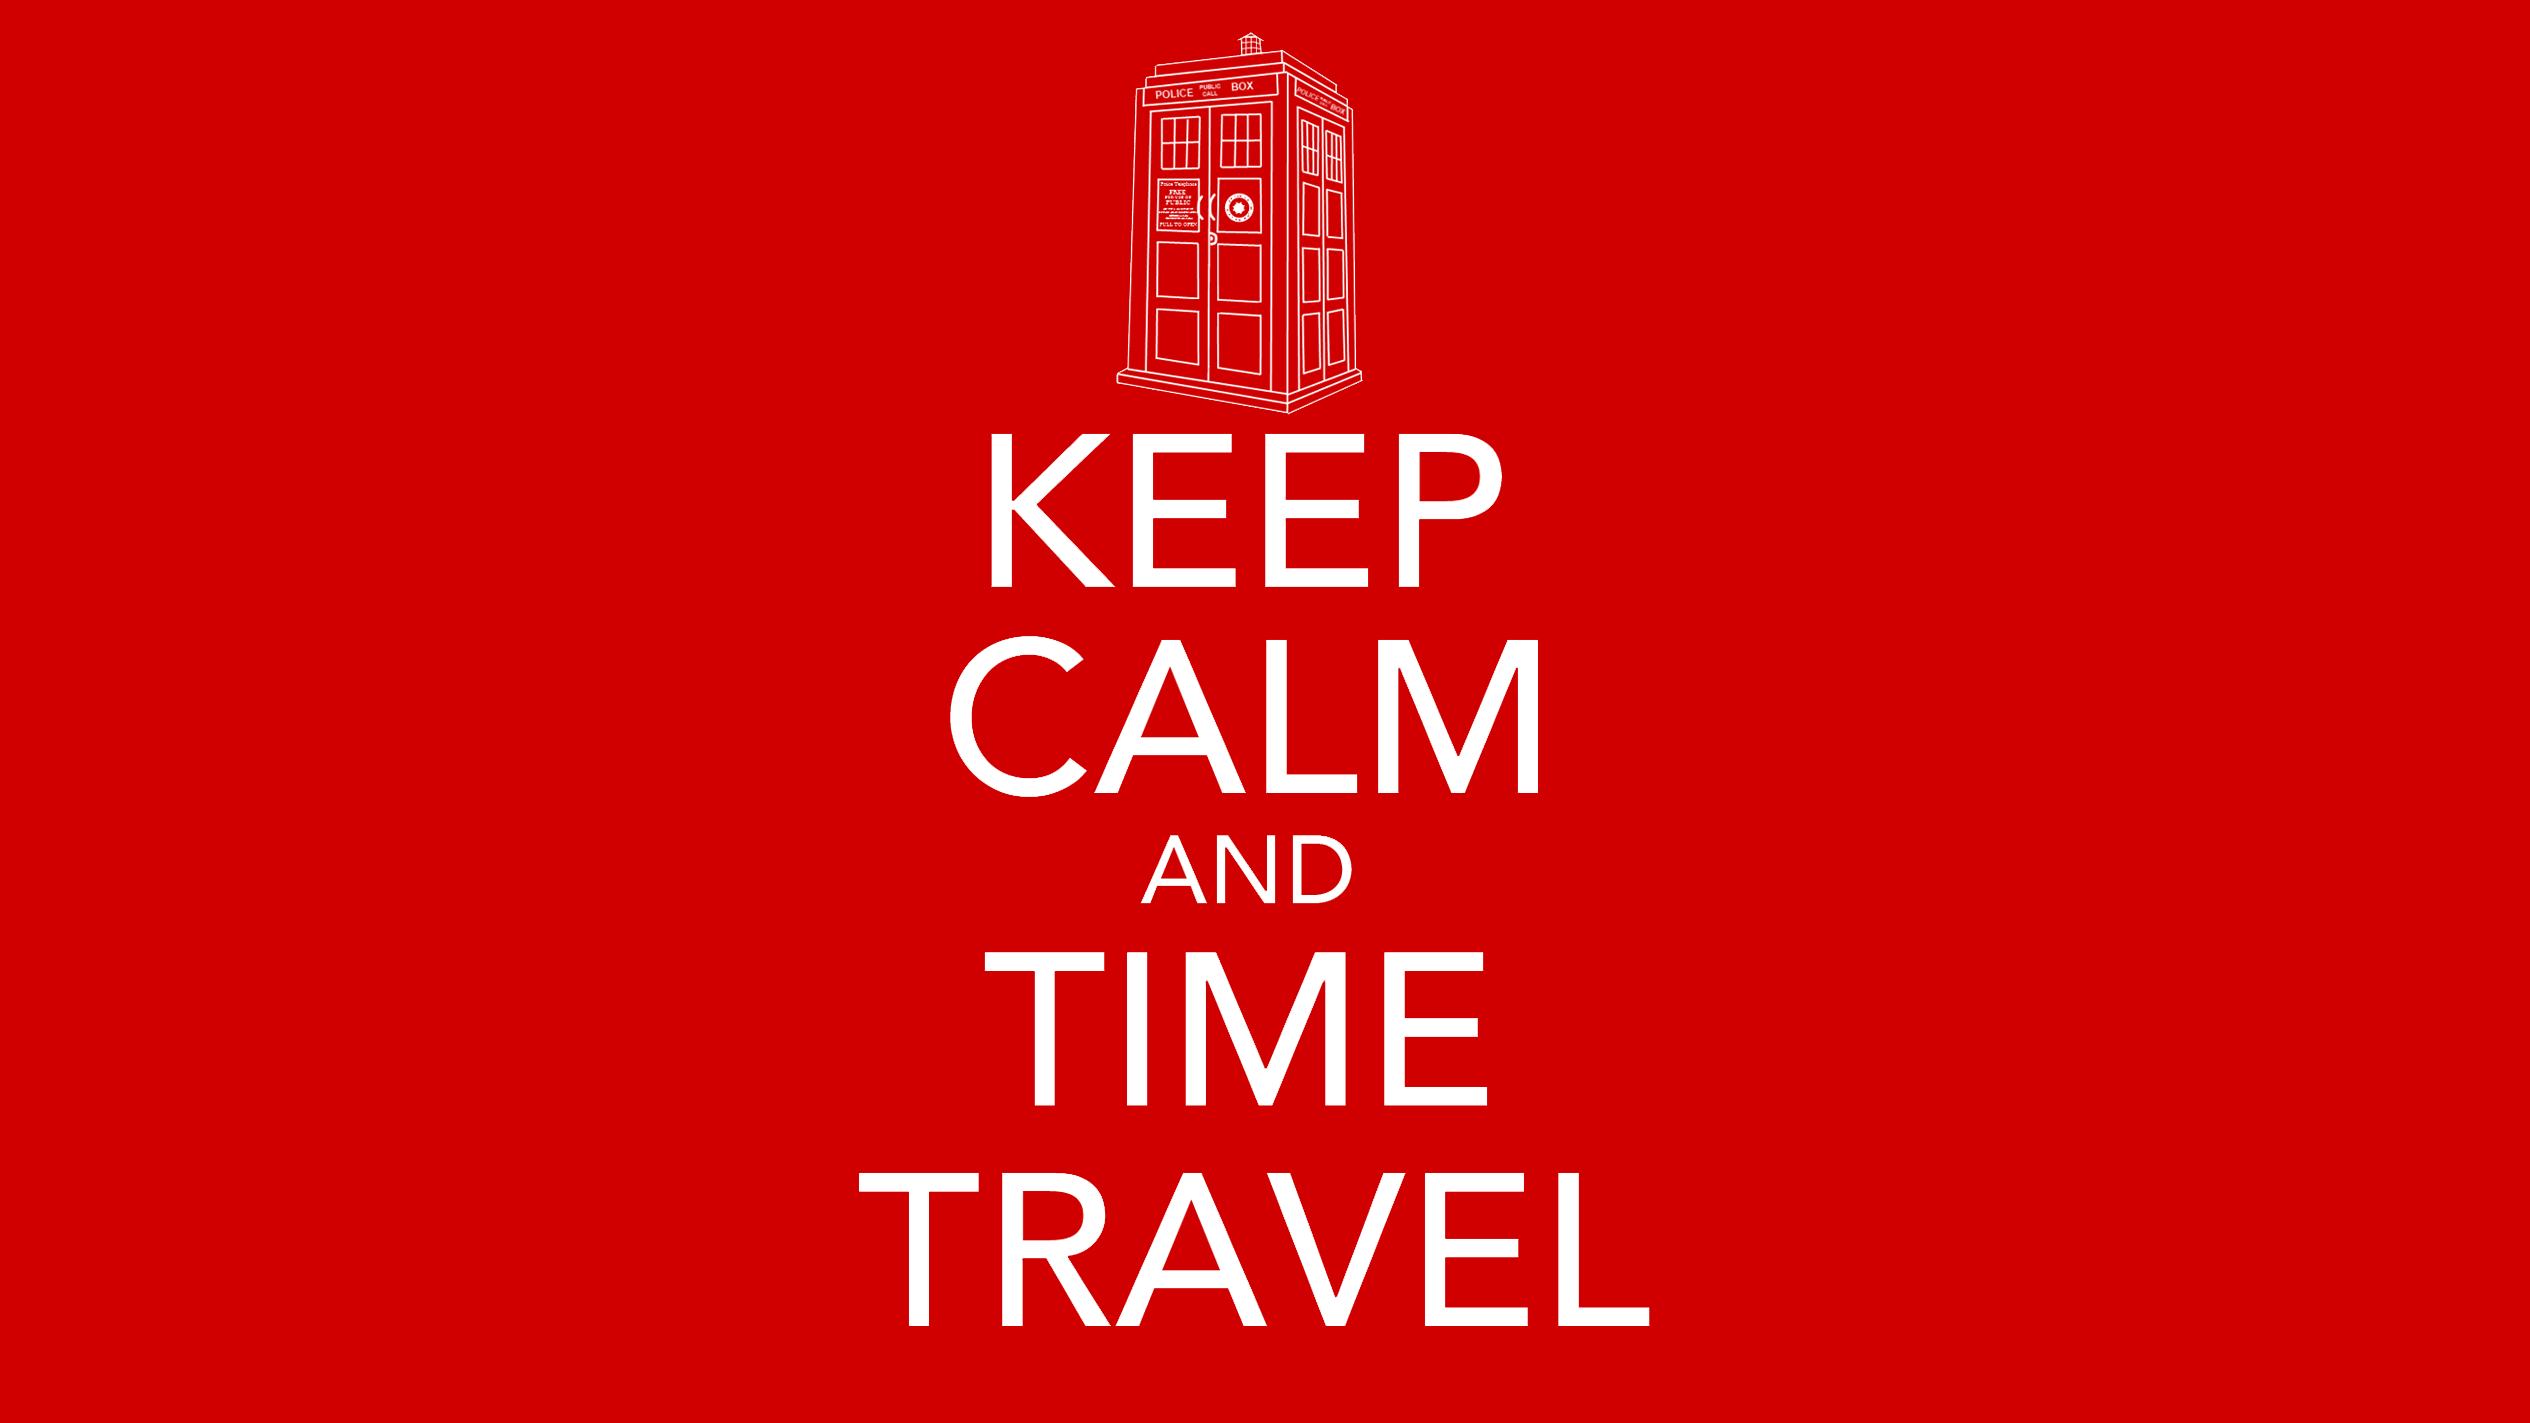 General 2530x1423 Doctor Who science fiction red Keep Calm and... The Doctor TARDIS artwork time travel red background TV series simple background typography